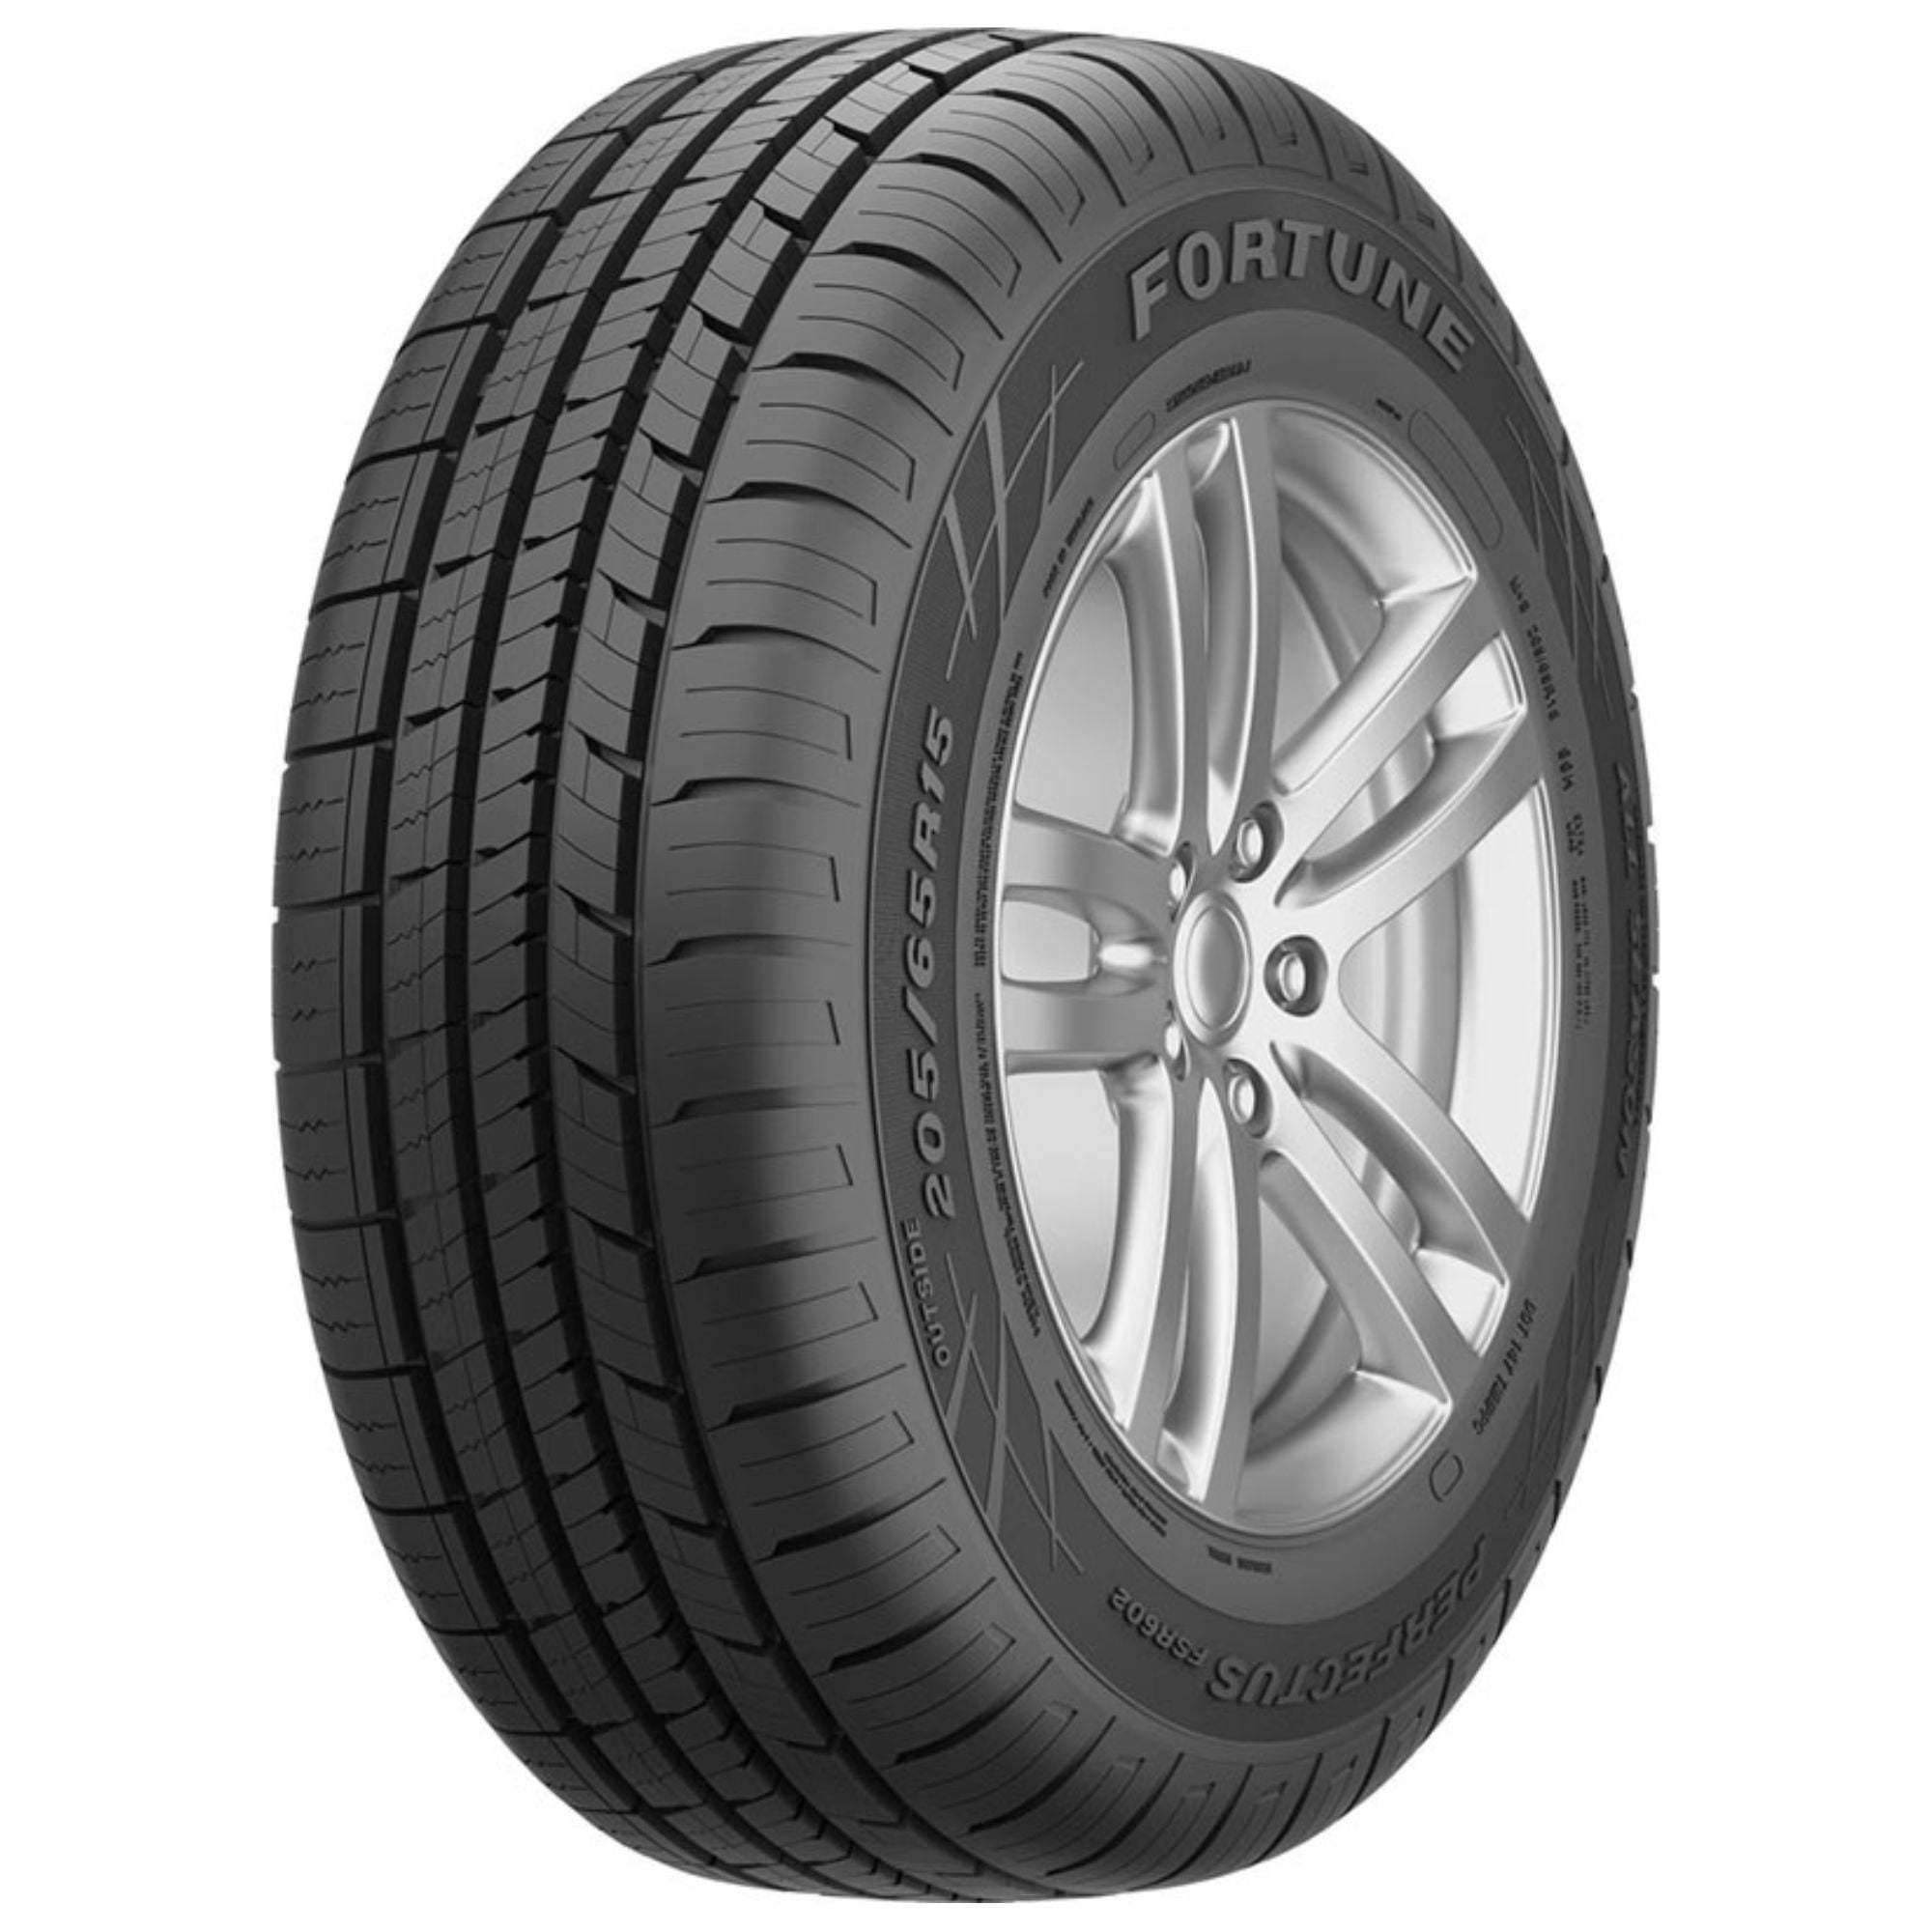 Continental TrueContact Tour 175/65R15 84H BSW All Season Tire